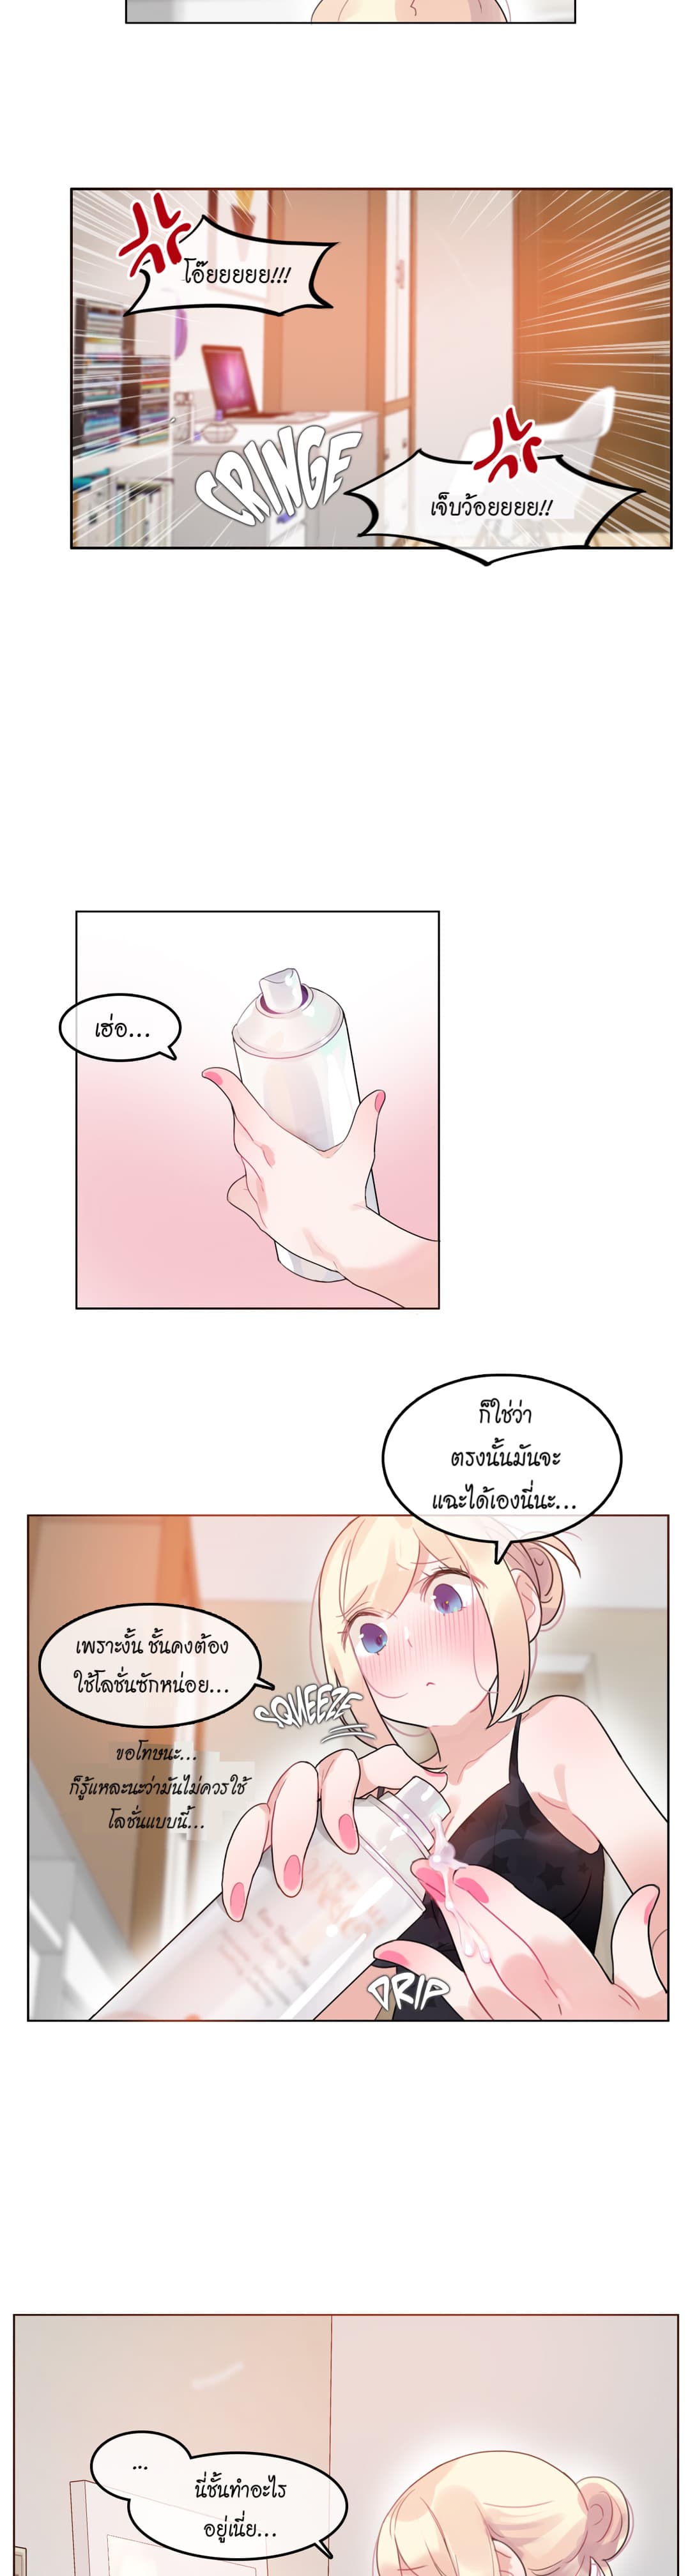 A Pervert’s Daily Life 38 (10)